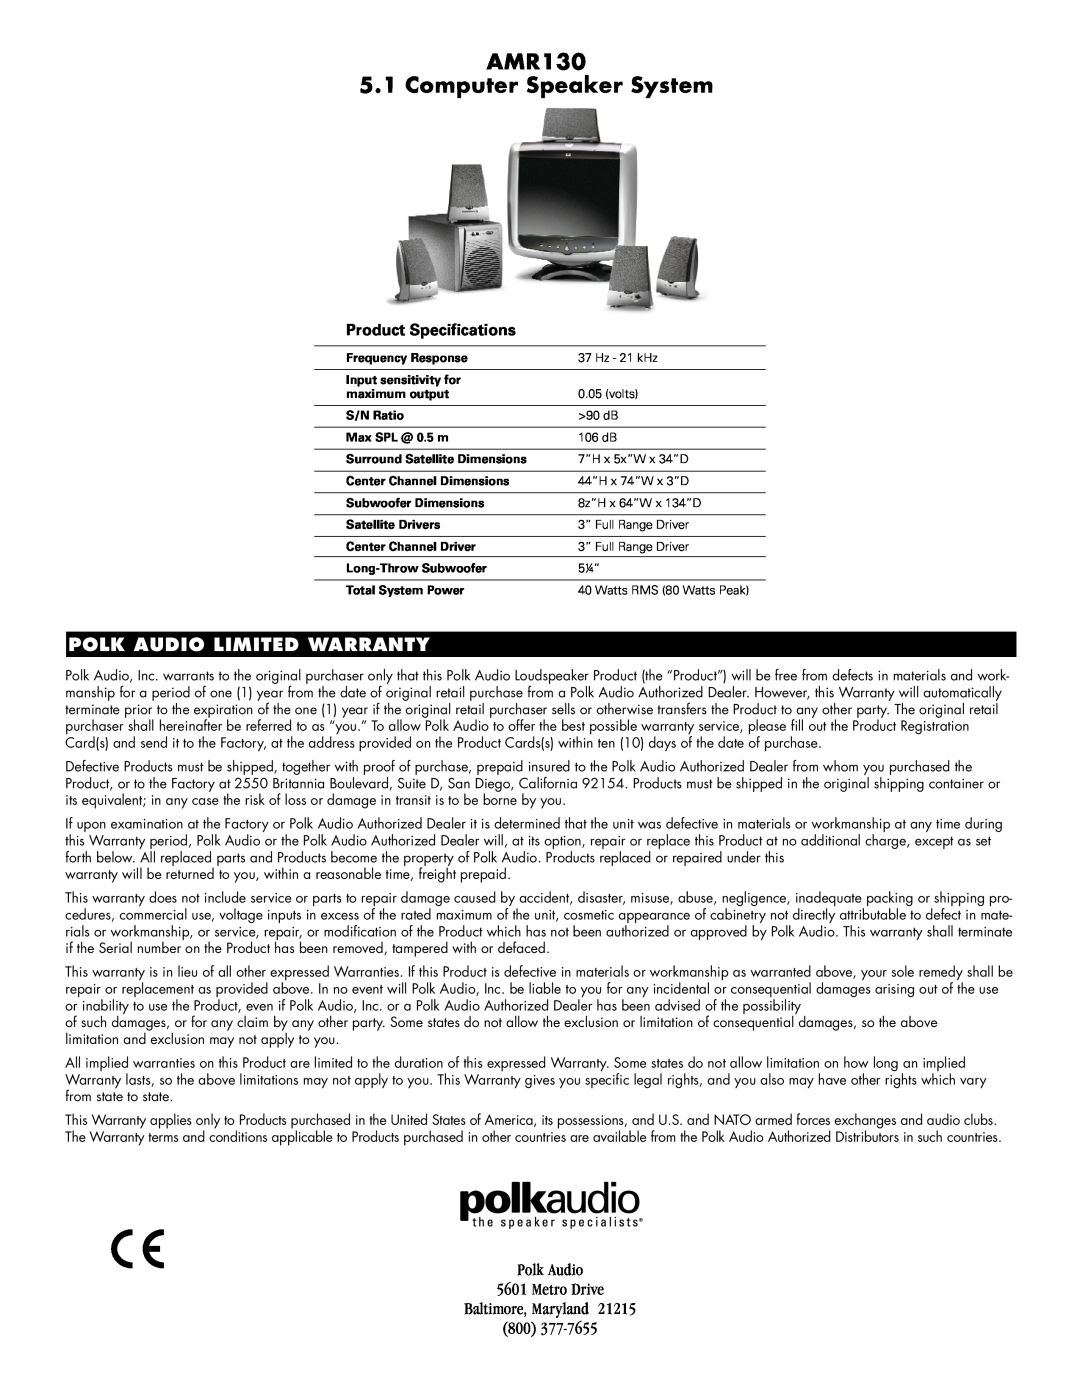 Polk Audio AMR 130 owner manual Product Specifications, AMR130 5.1 Computer Speaker System, Polk Audio Limited Warranty 